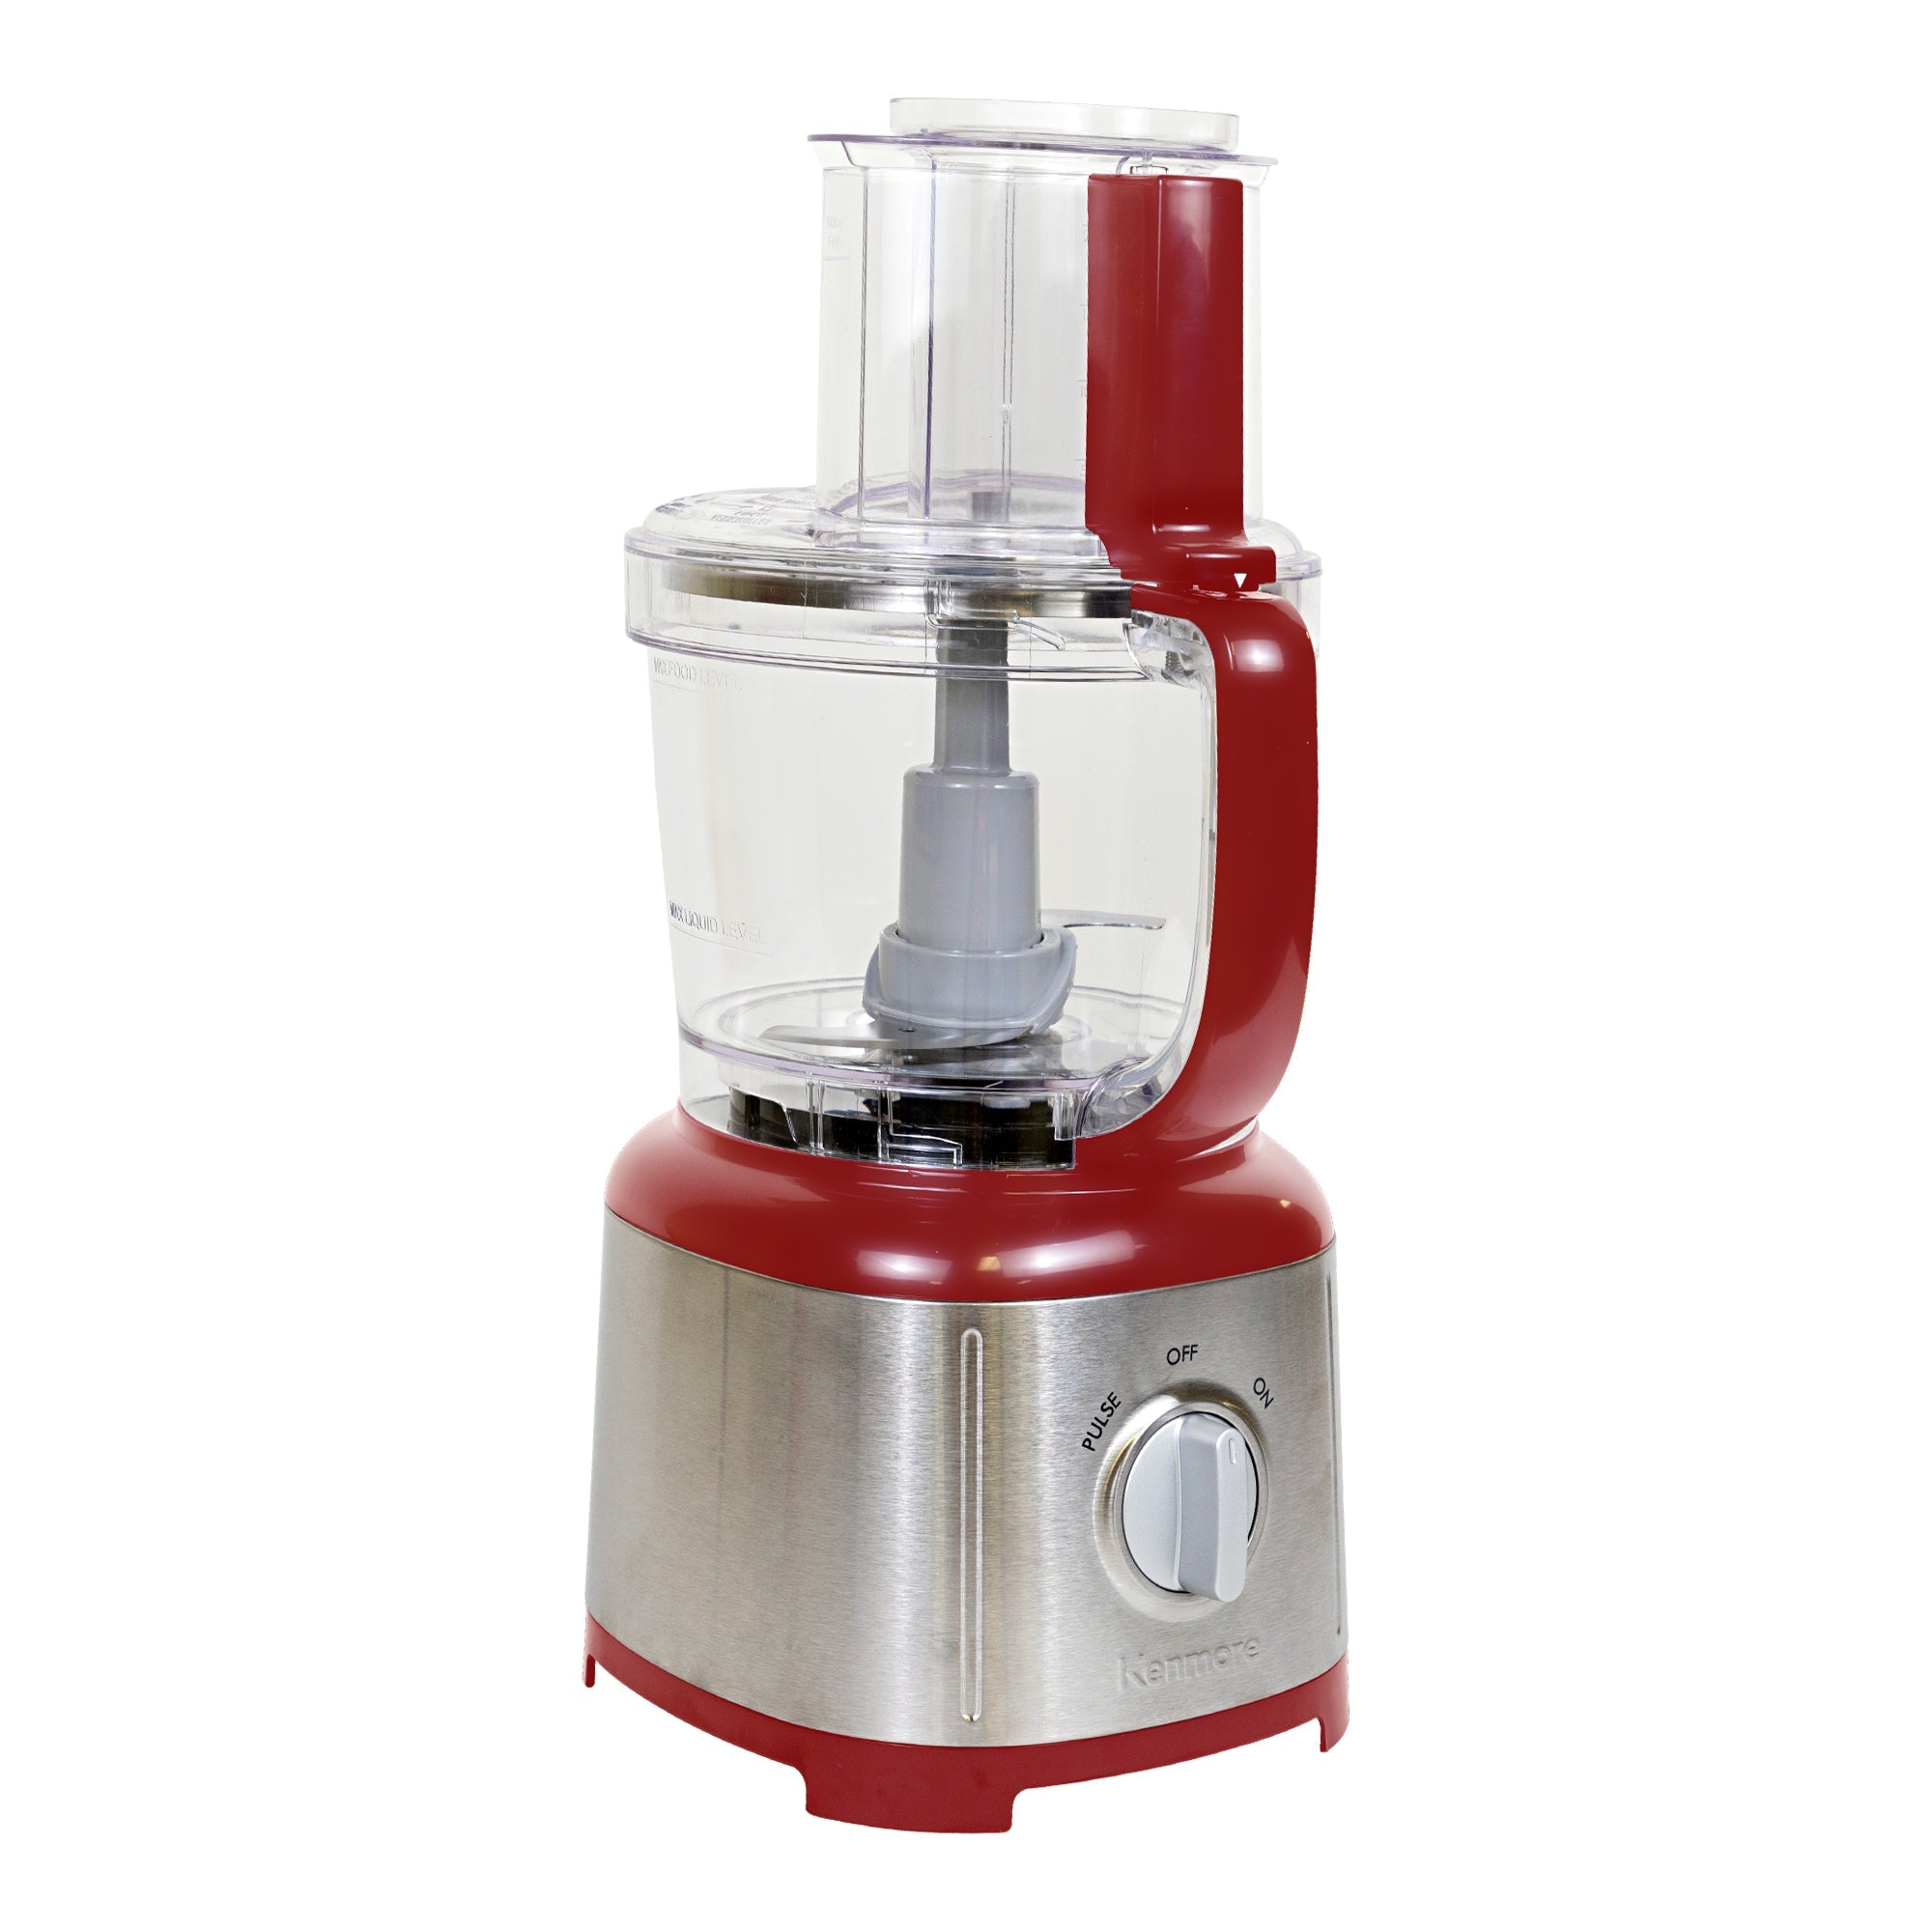 Kenmore 11 cup food processor and vegetable chopper on a white background